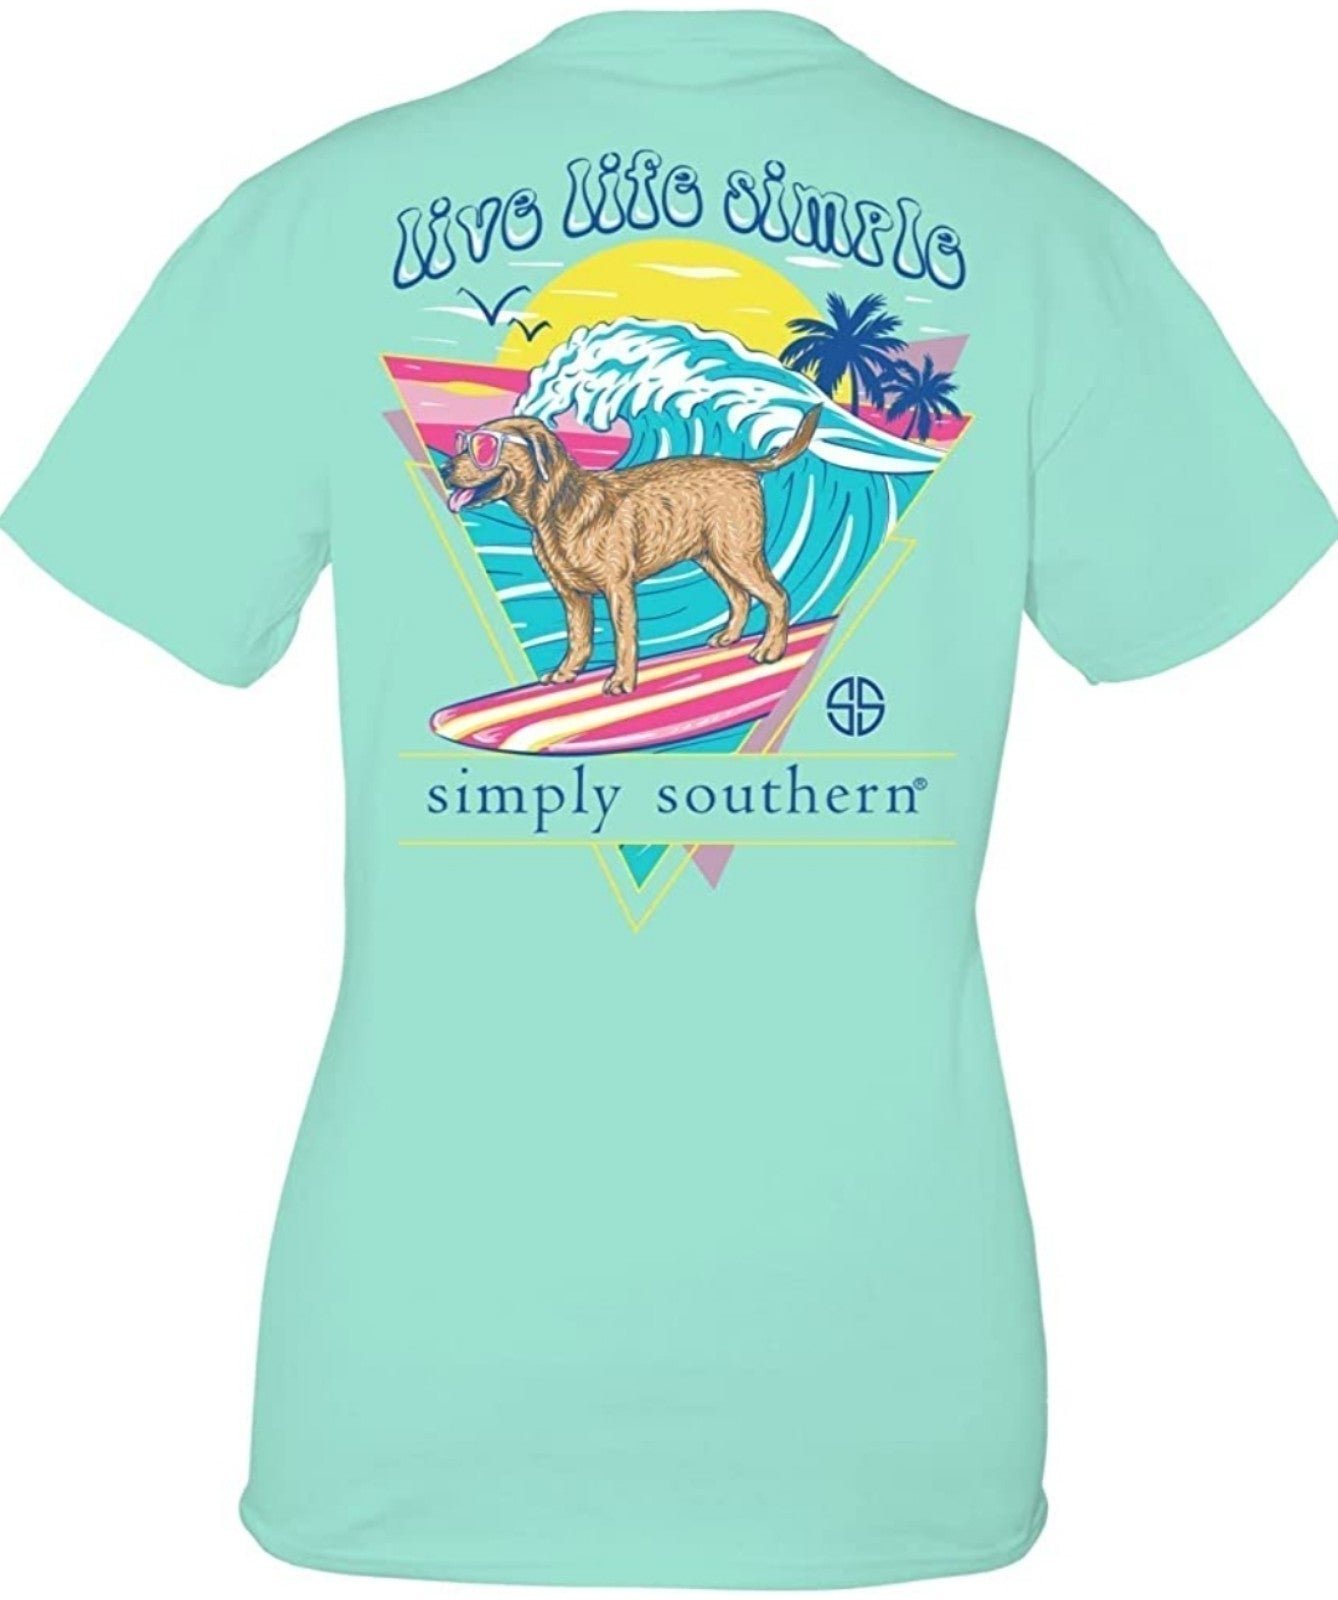 Special offer  Simply Southern T-shirt XX-Large oC0VF8TA6 Online Shop